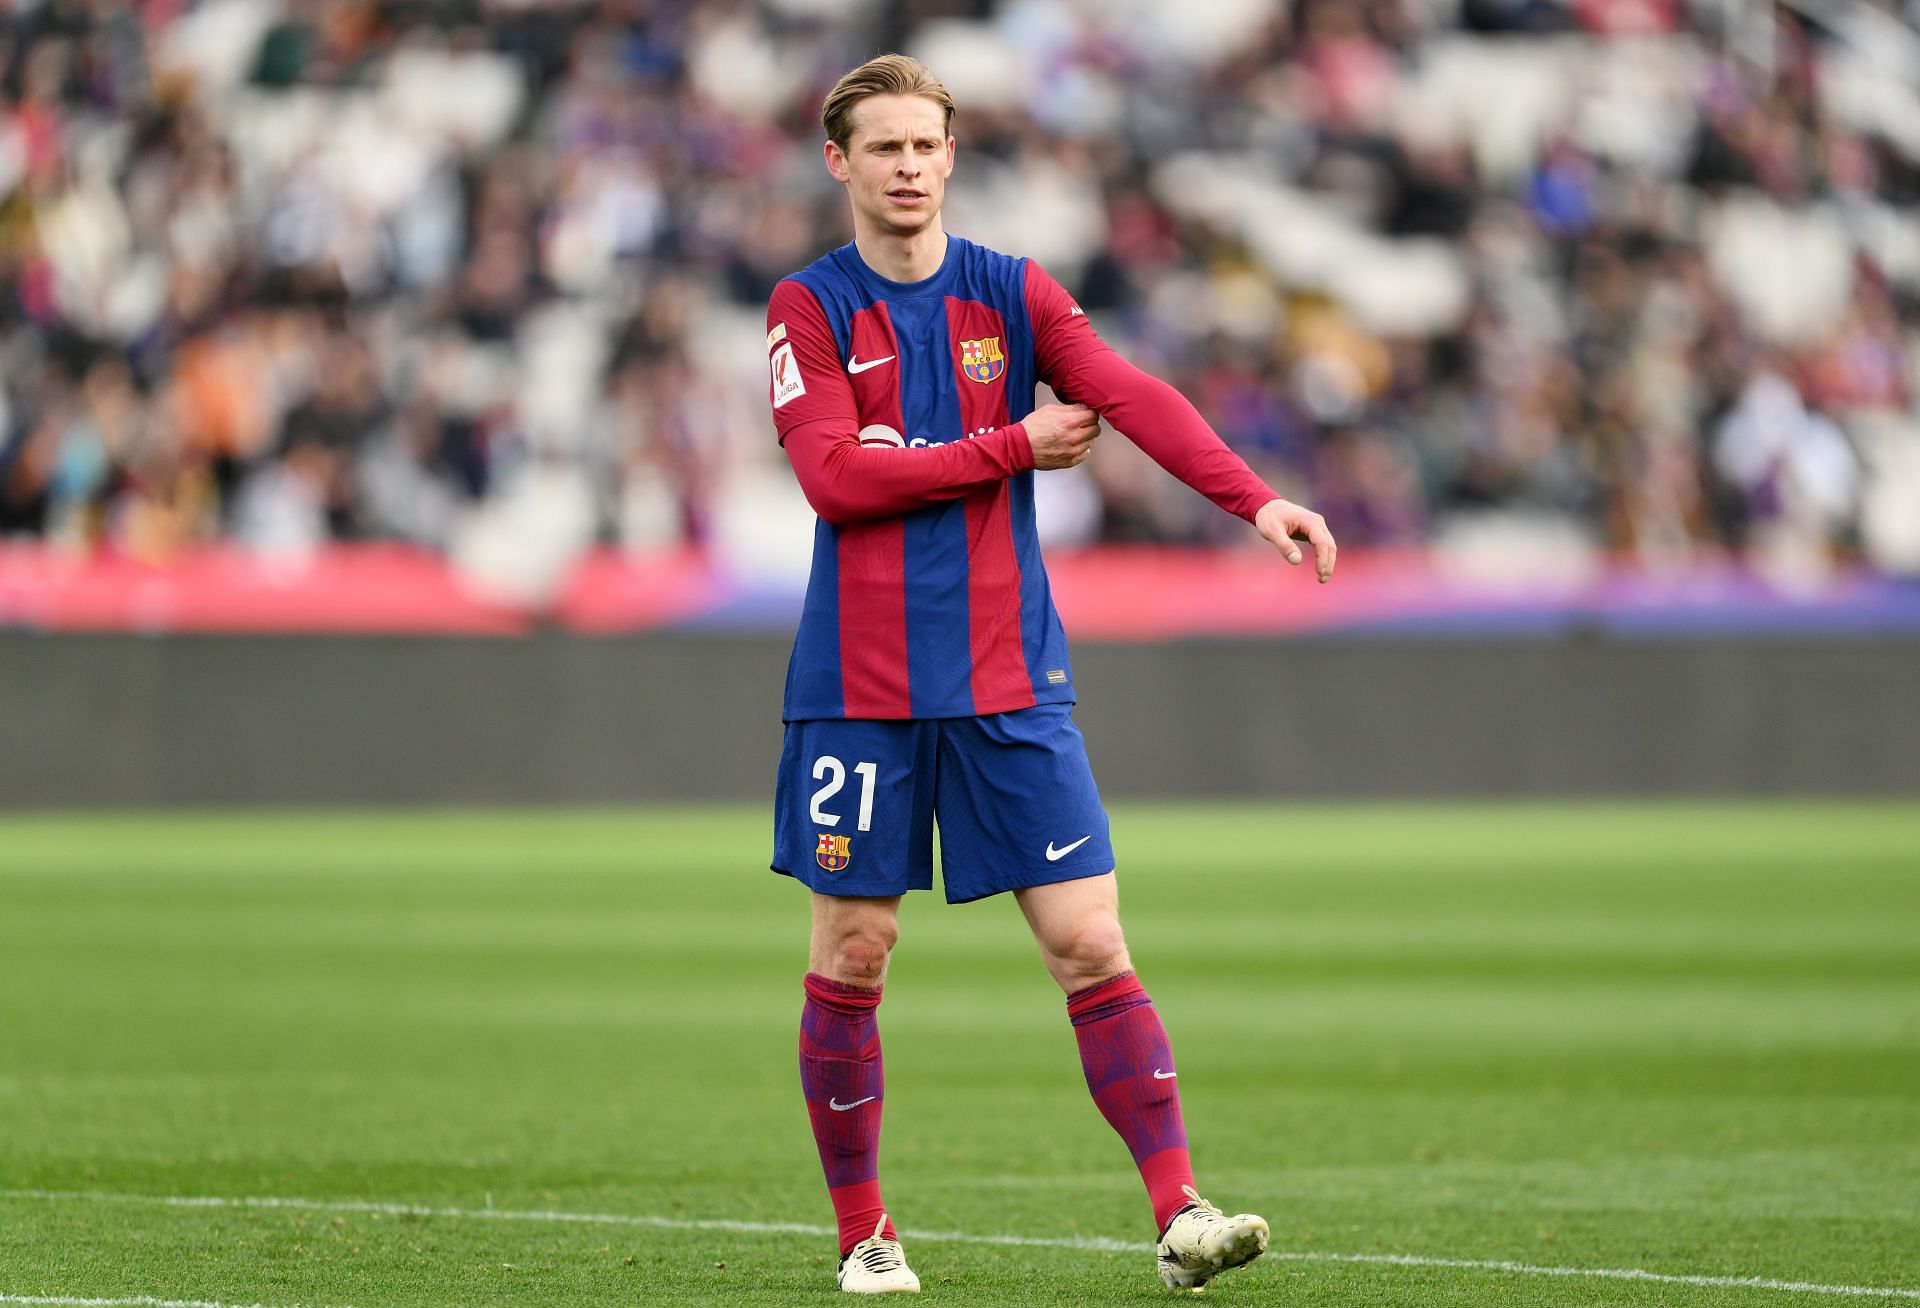 Frenkie de Jong wants to stay at the Camp Nou.